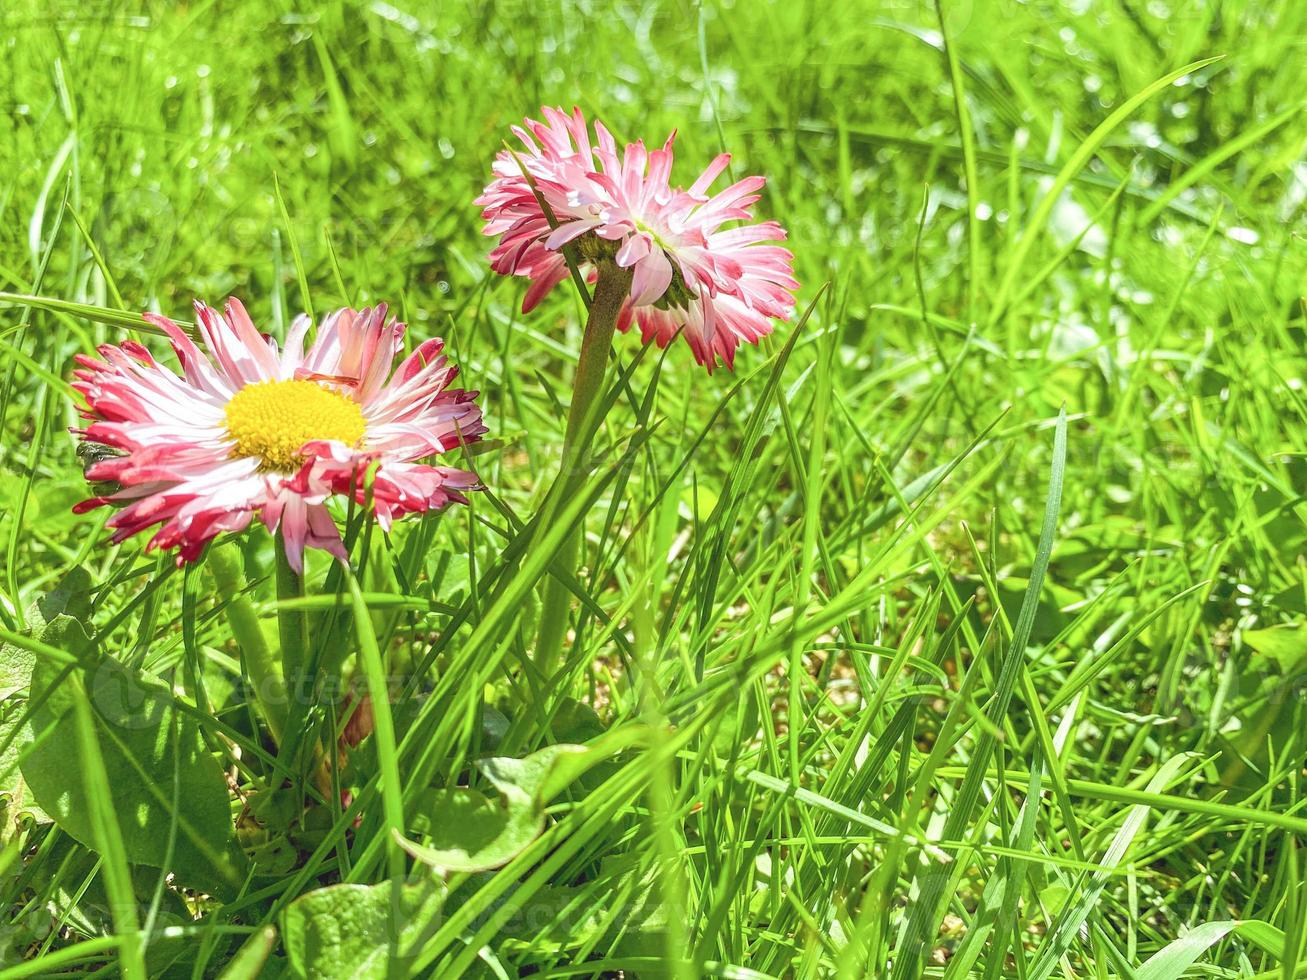 pink daisies with a yellow center on the field. cute home flowers grow in the country among the grass. spring plants in the meadow photo